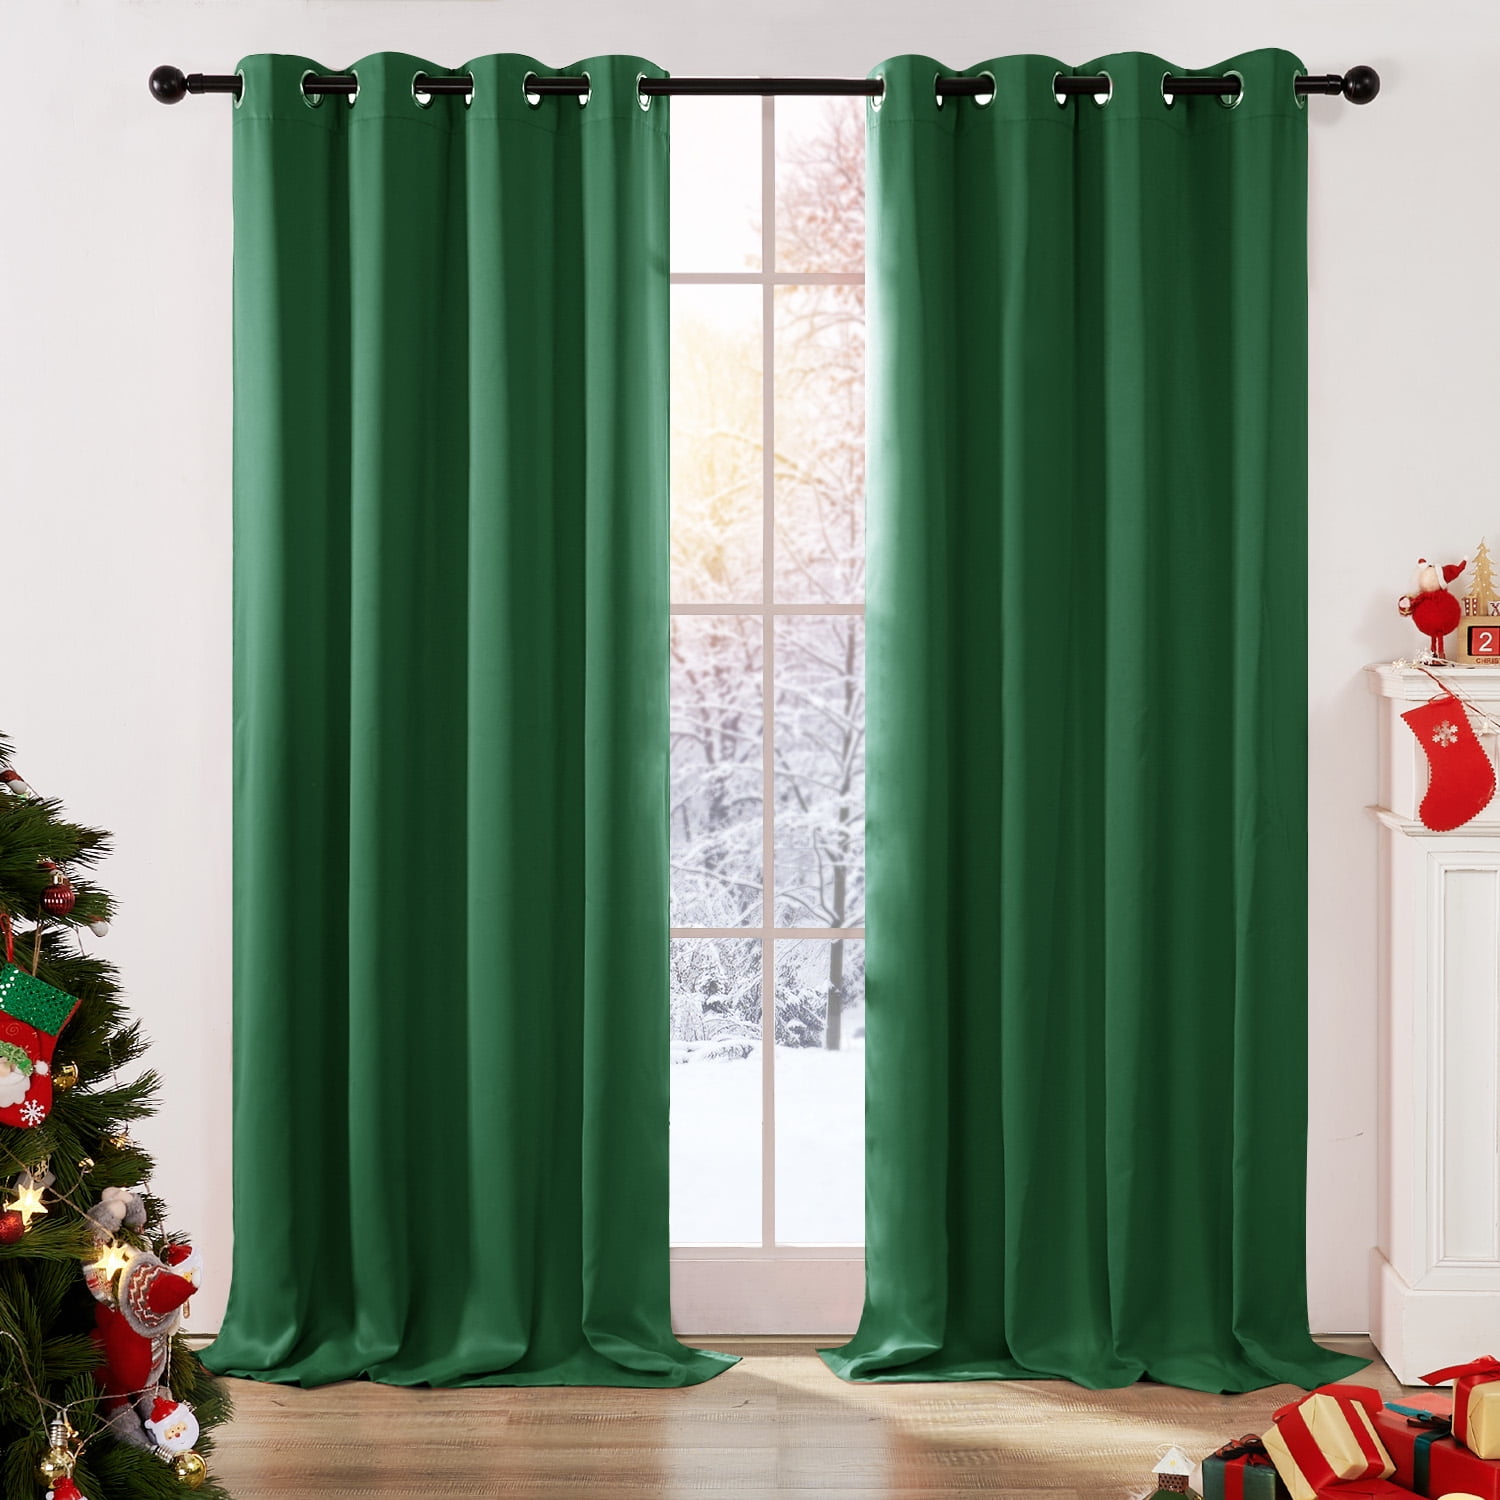 Deconovo Christmas Blackout Curtains Set of 2, 84 inches long - Solid Thermal Insulated Bedroom and Living Room Curtains (52x84 inch, Dark Green, Set of 2)